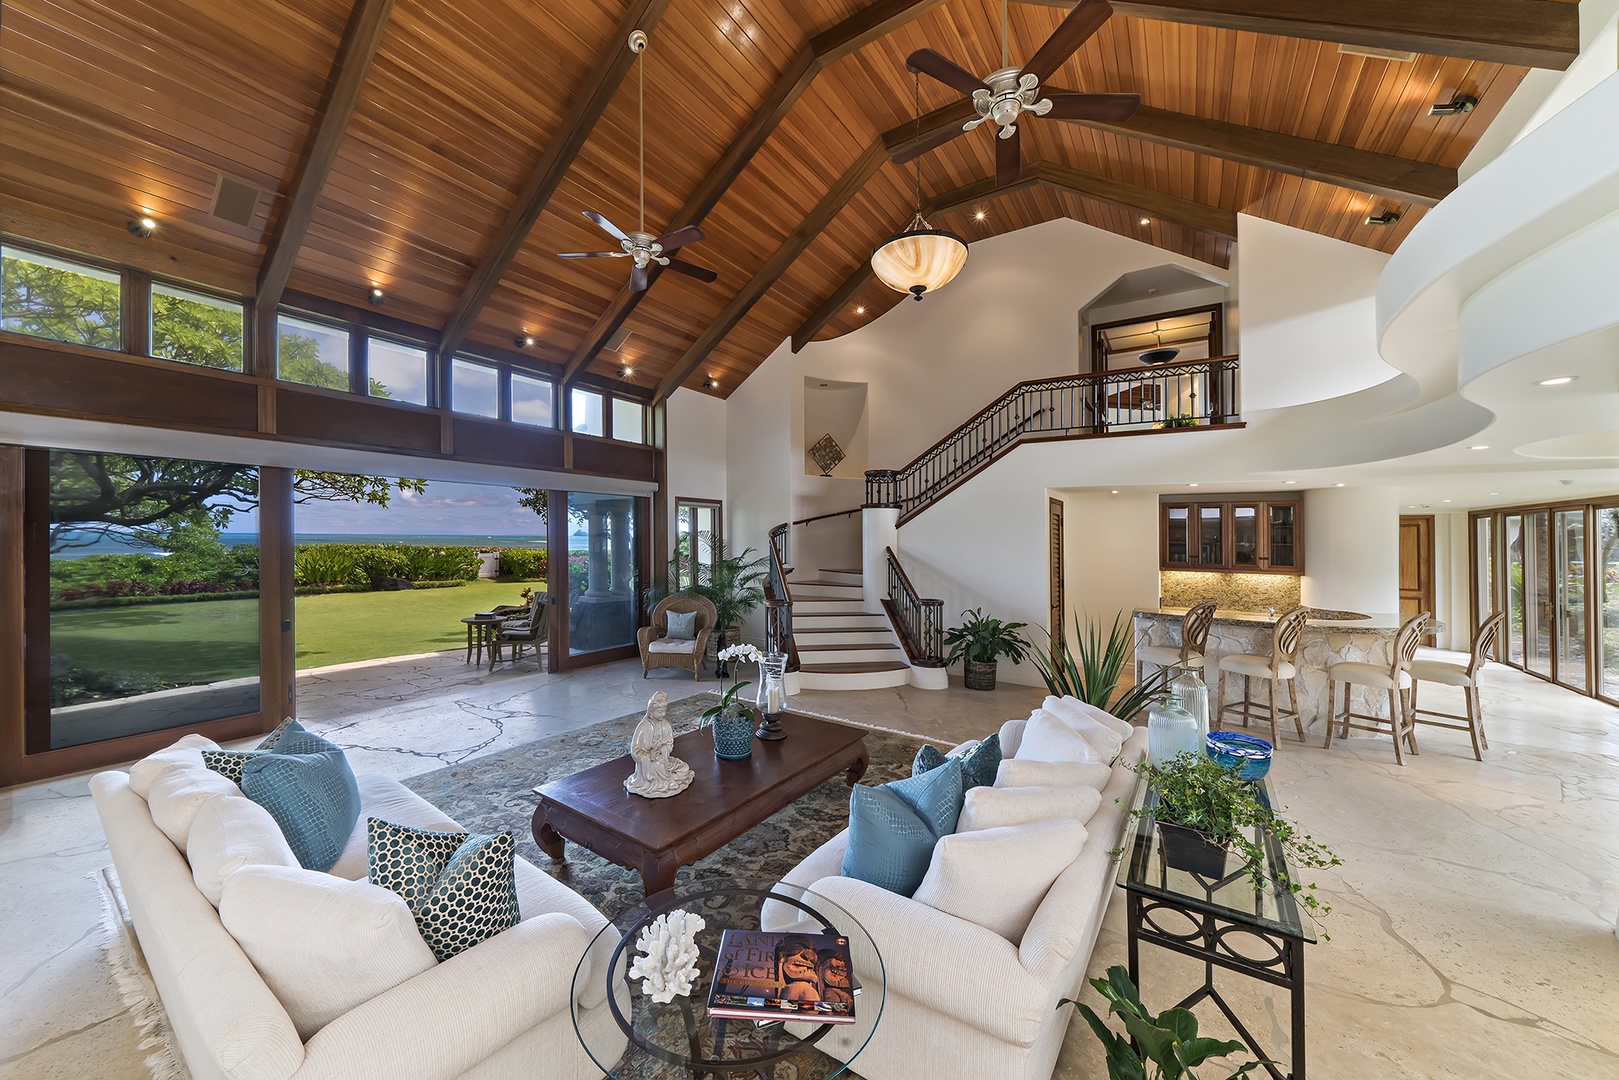 Kailua Vacation Rentals, Kailua's Kai Moena Estate - Main house: Main living room features breathtaking oceanfront views.  Follow the steps up towards the Primary Bedroom.